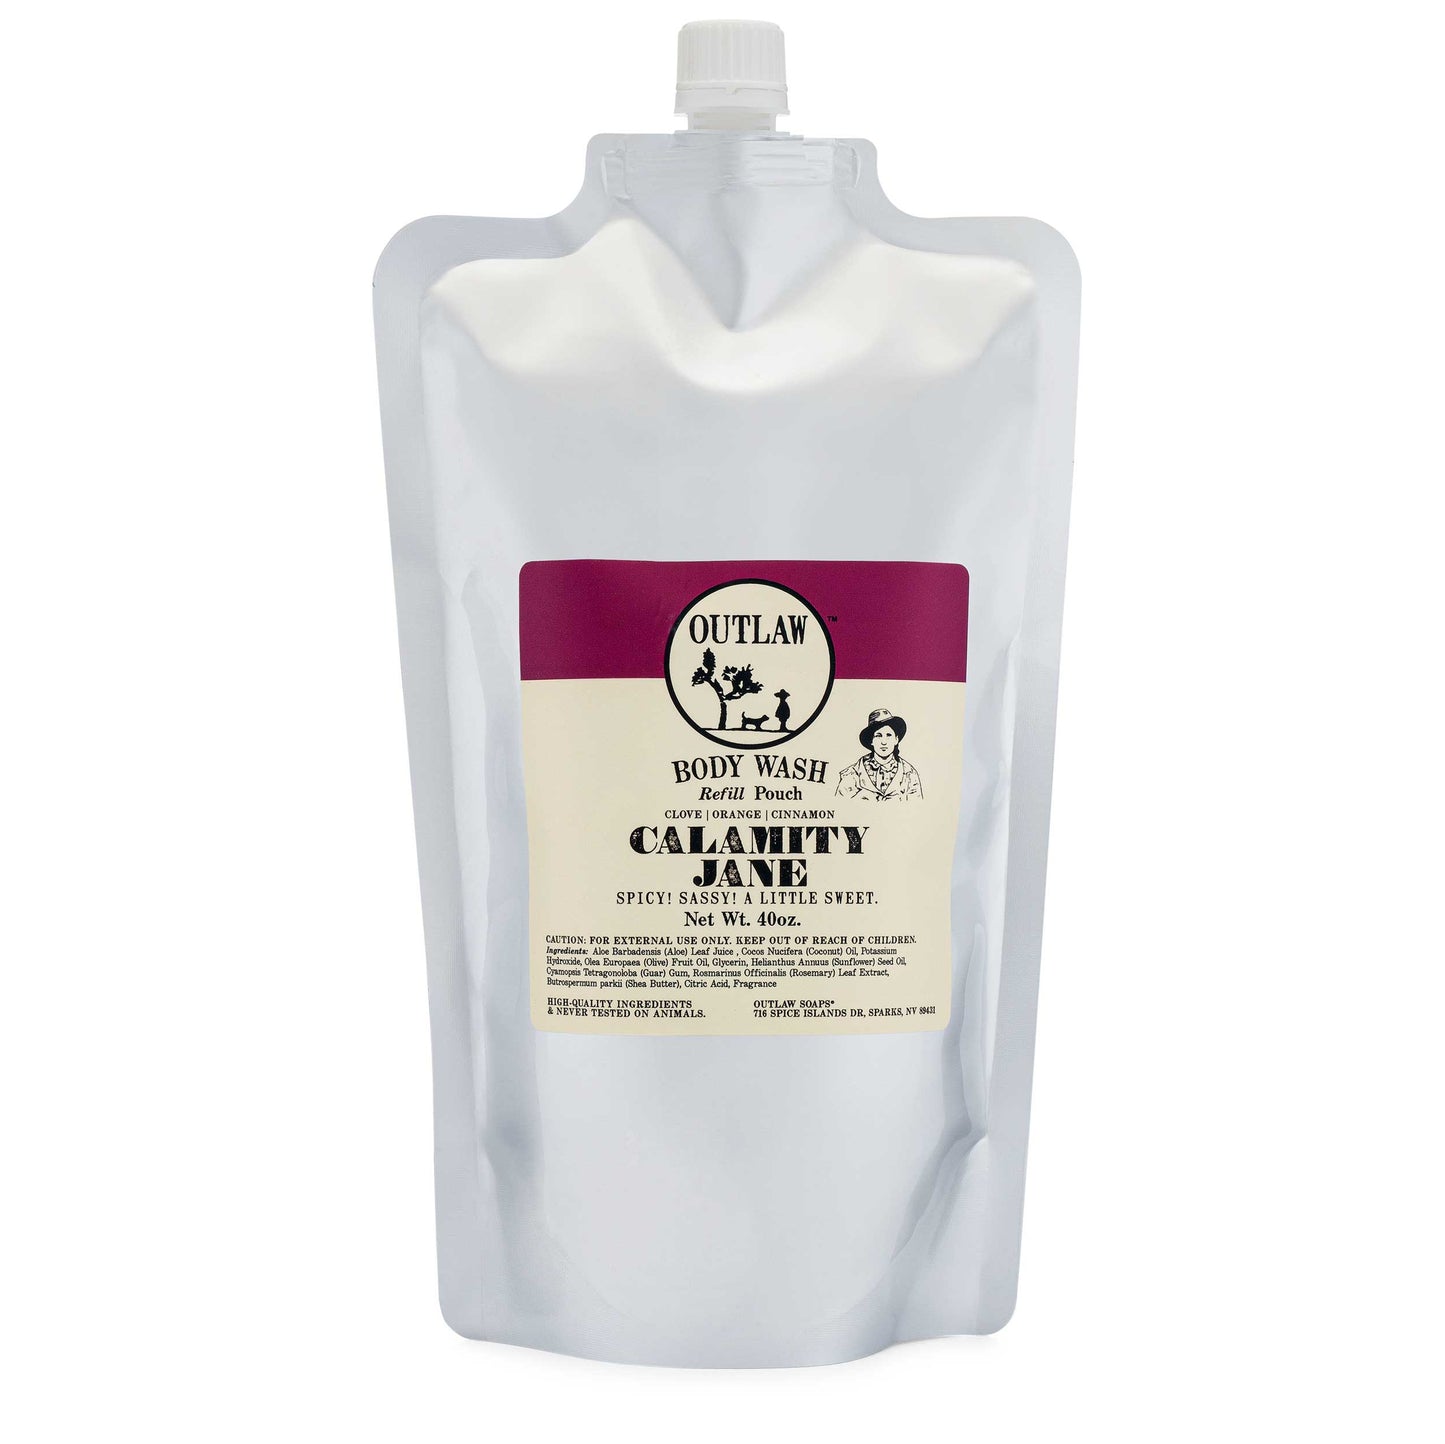 Outlaw Body Wash Refill Pouches